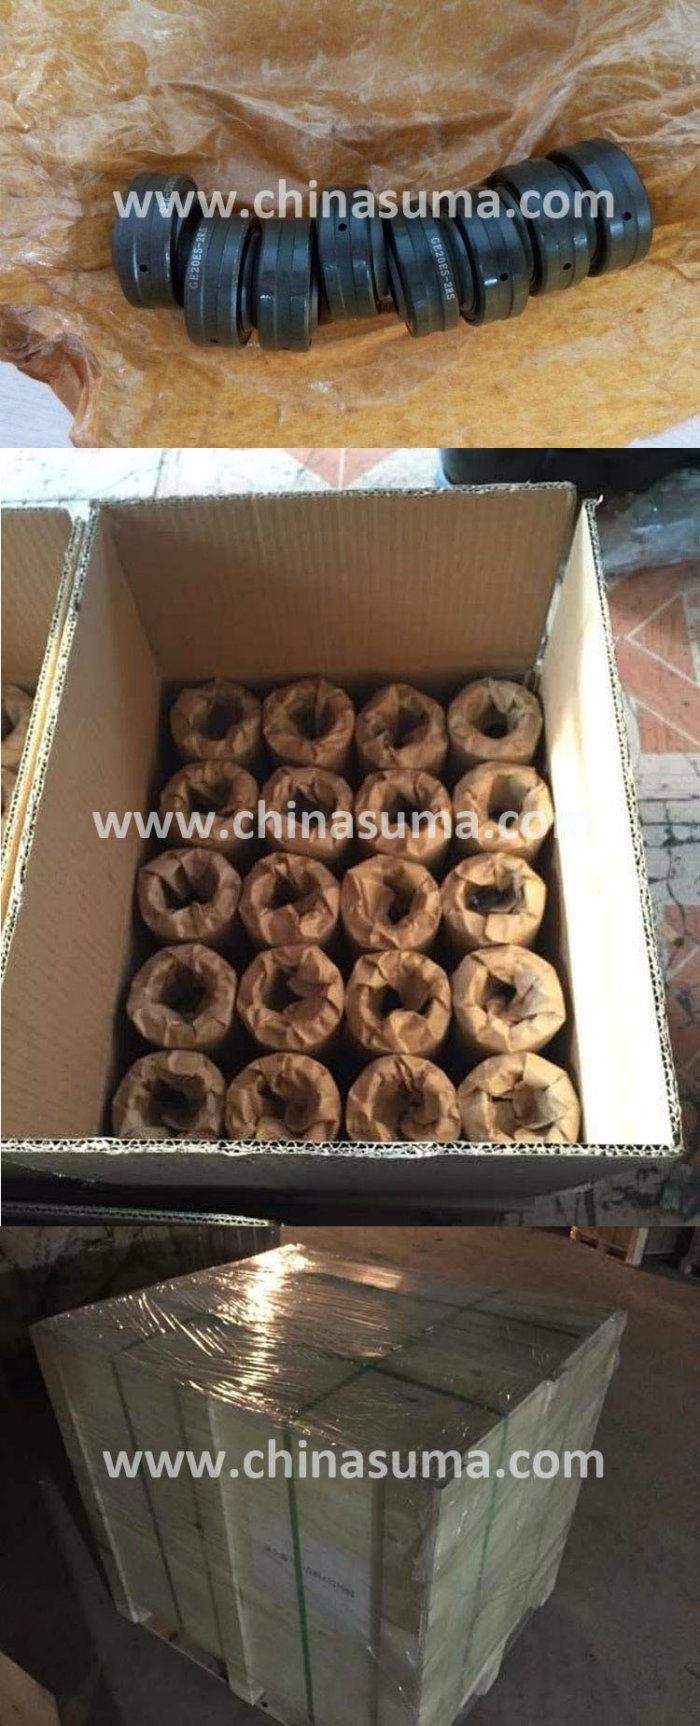 Radial Spherical Plain Bearing with Good Quality (GE Series)